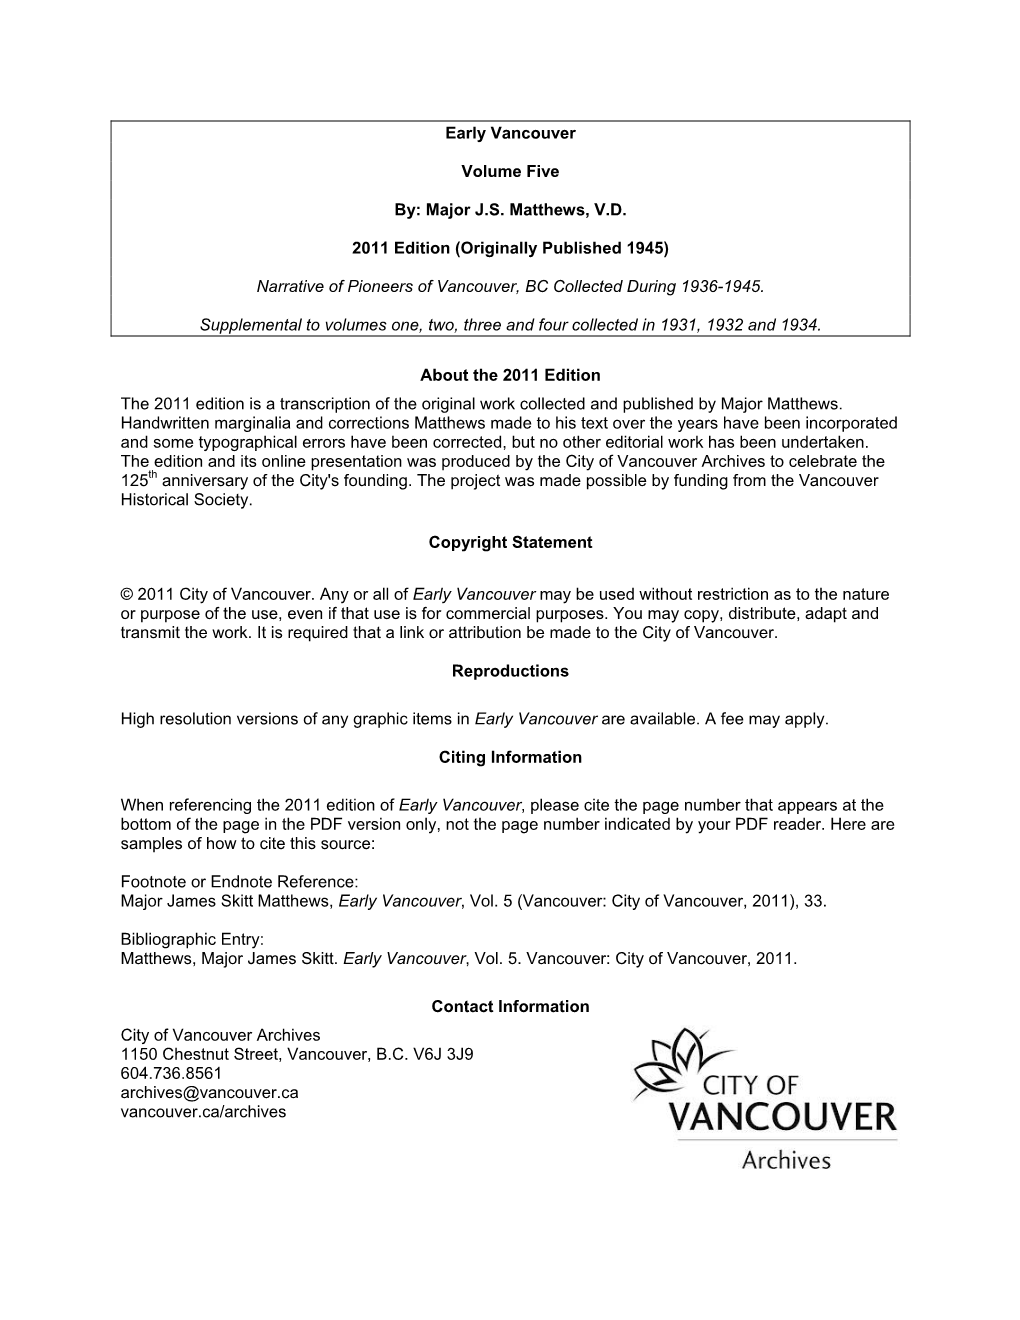 Early Vancouver Volume Five